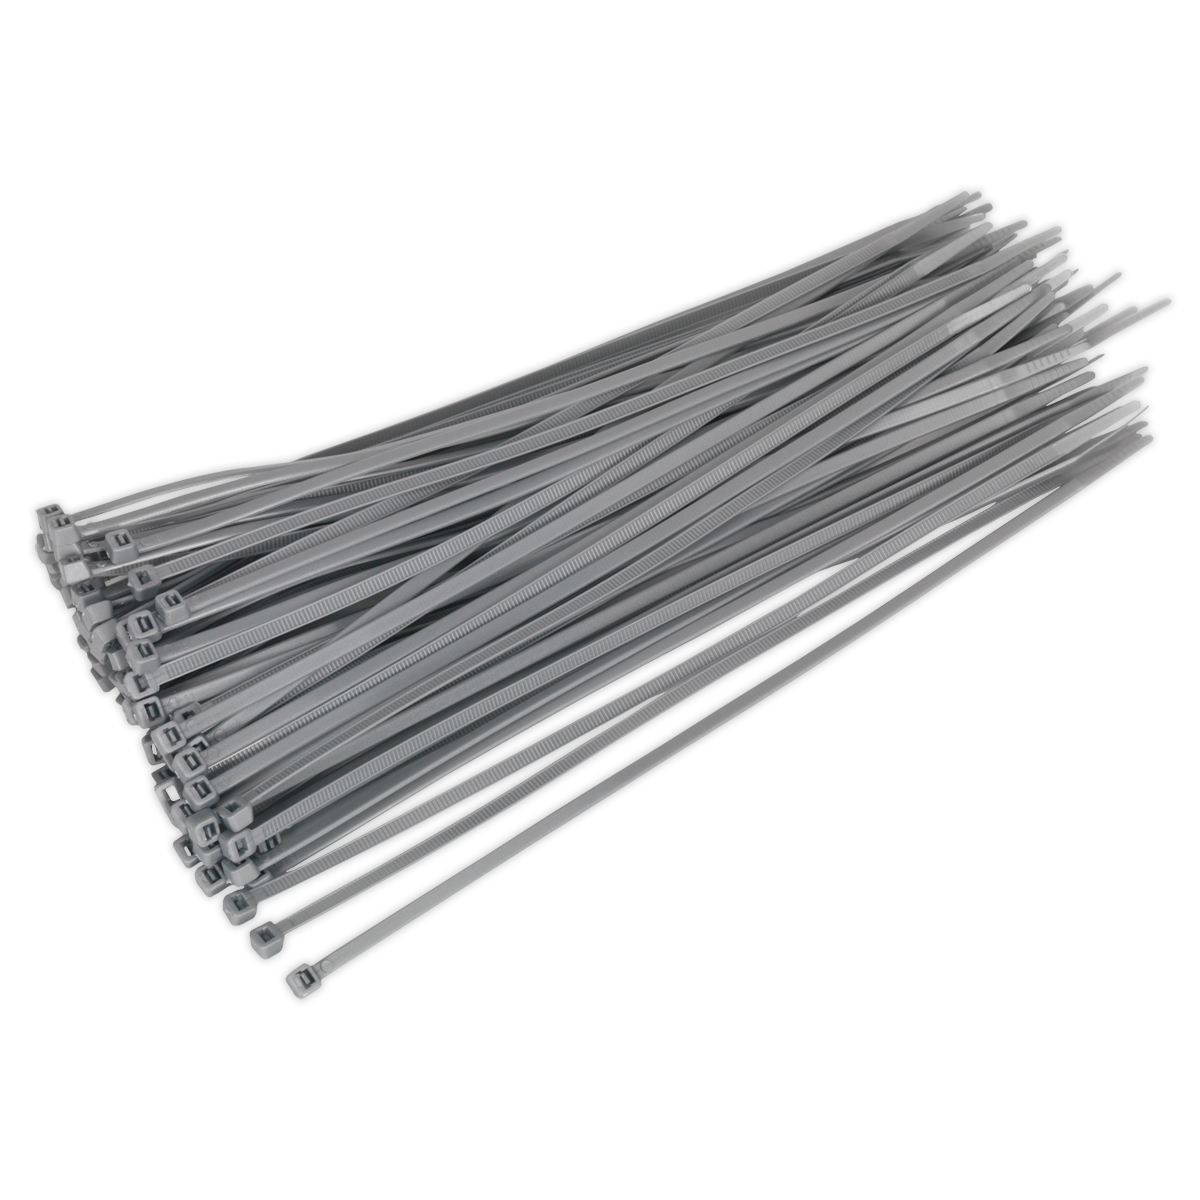 Cable Tie 300 x 4.4mm Silver Pack of 100 - CT30048P100S - Farming Parts